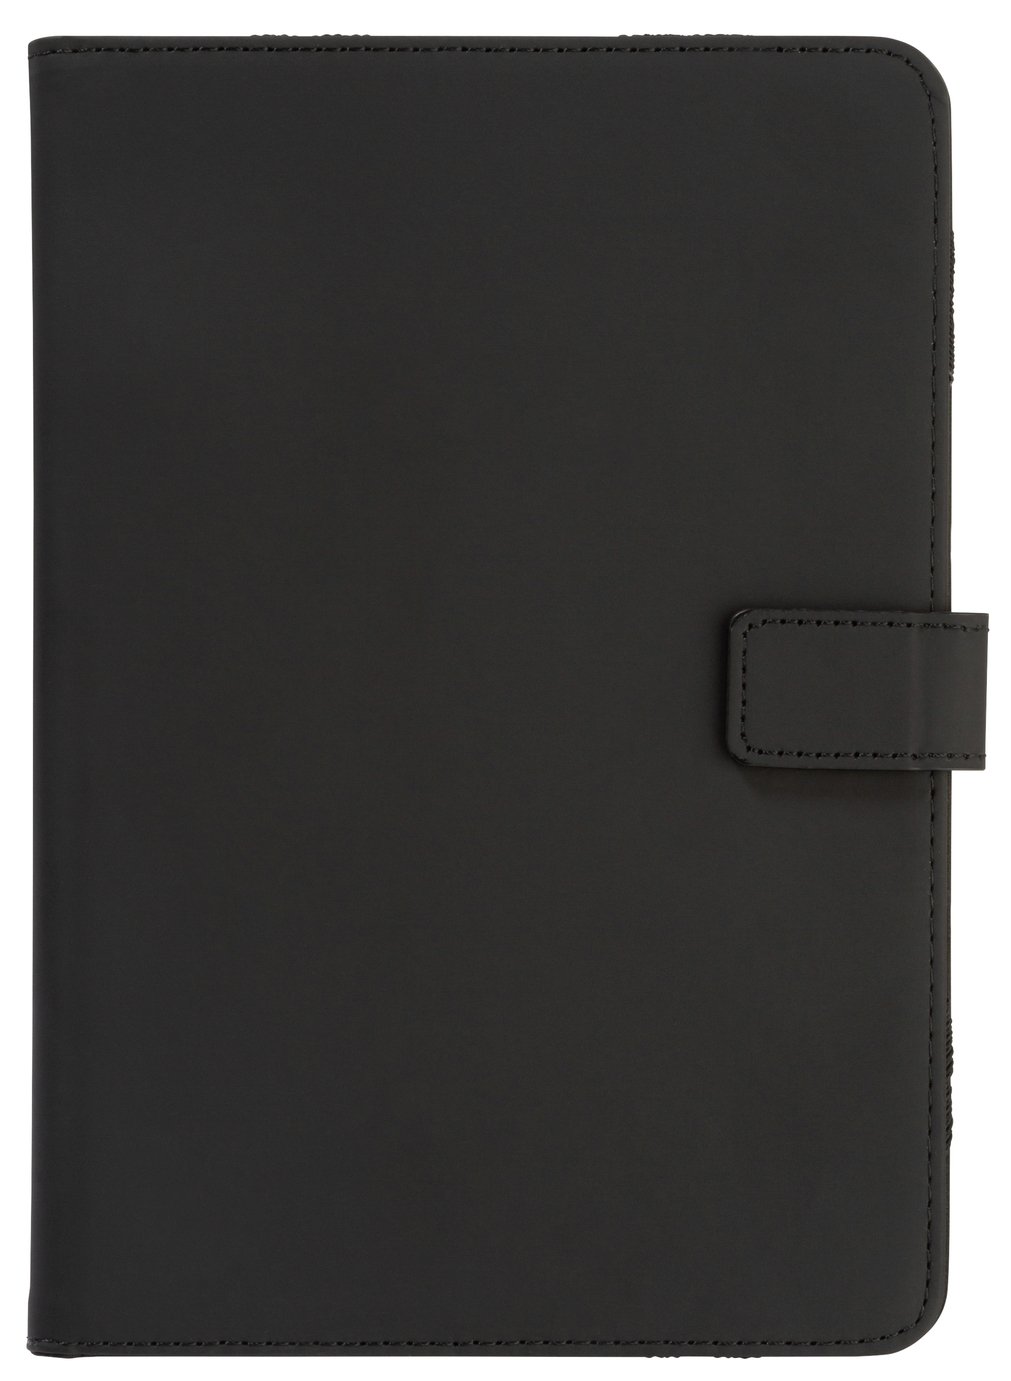 Universal 7/8 Inch PVC Tablet Case Review